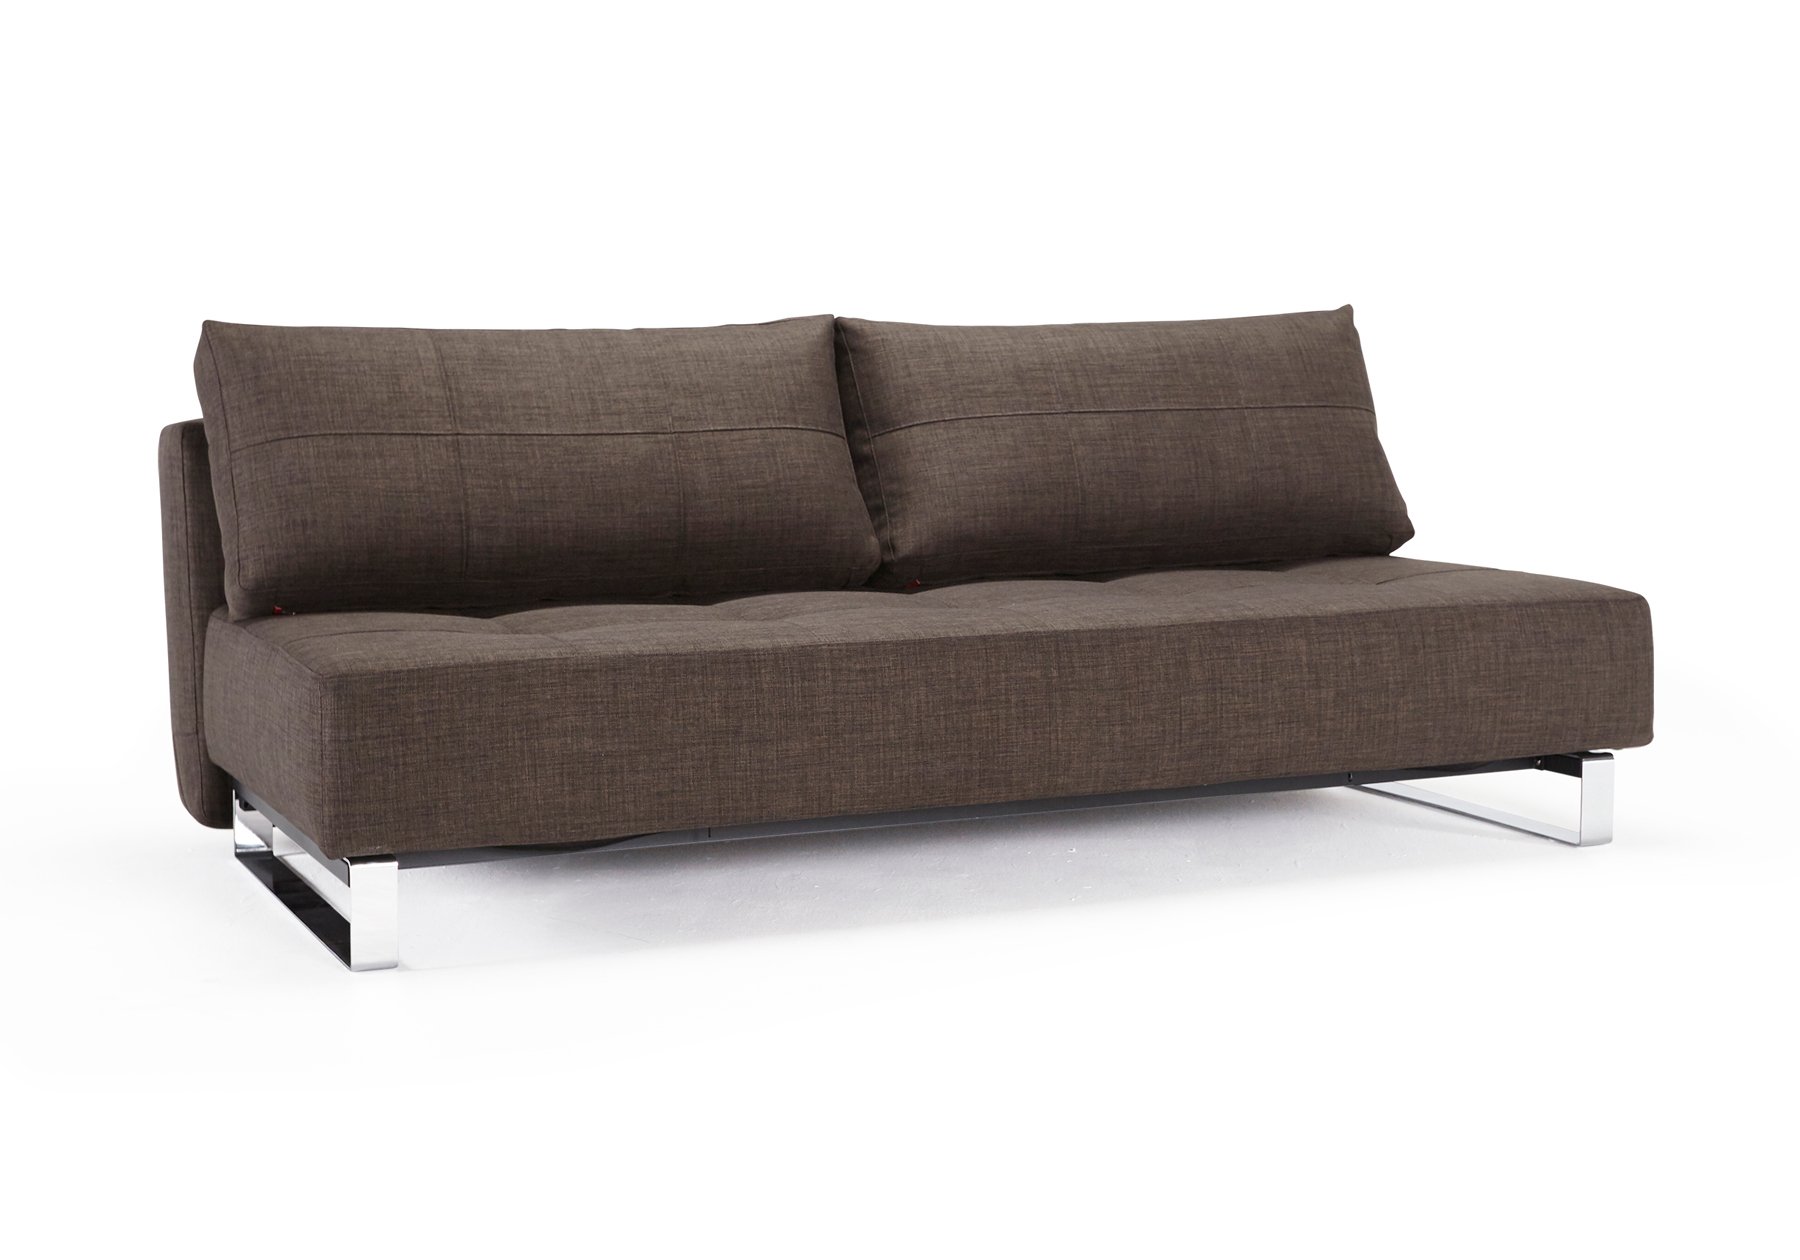 supremax deluxe excess sofa bed